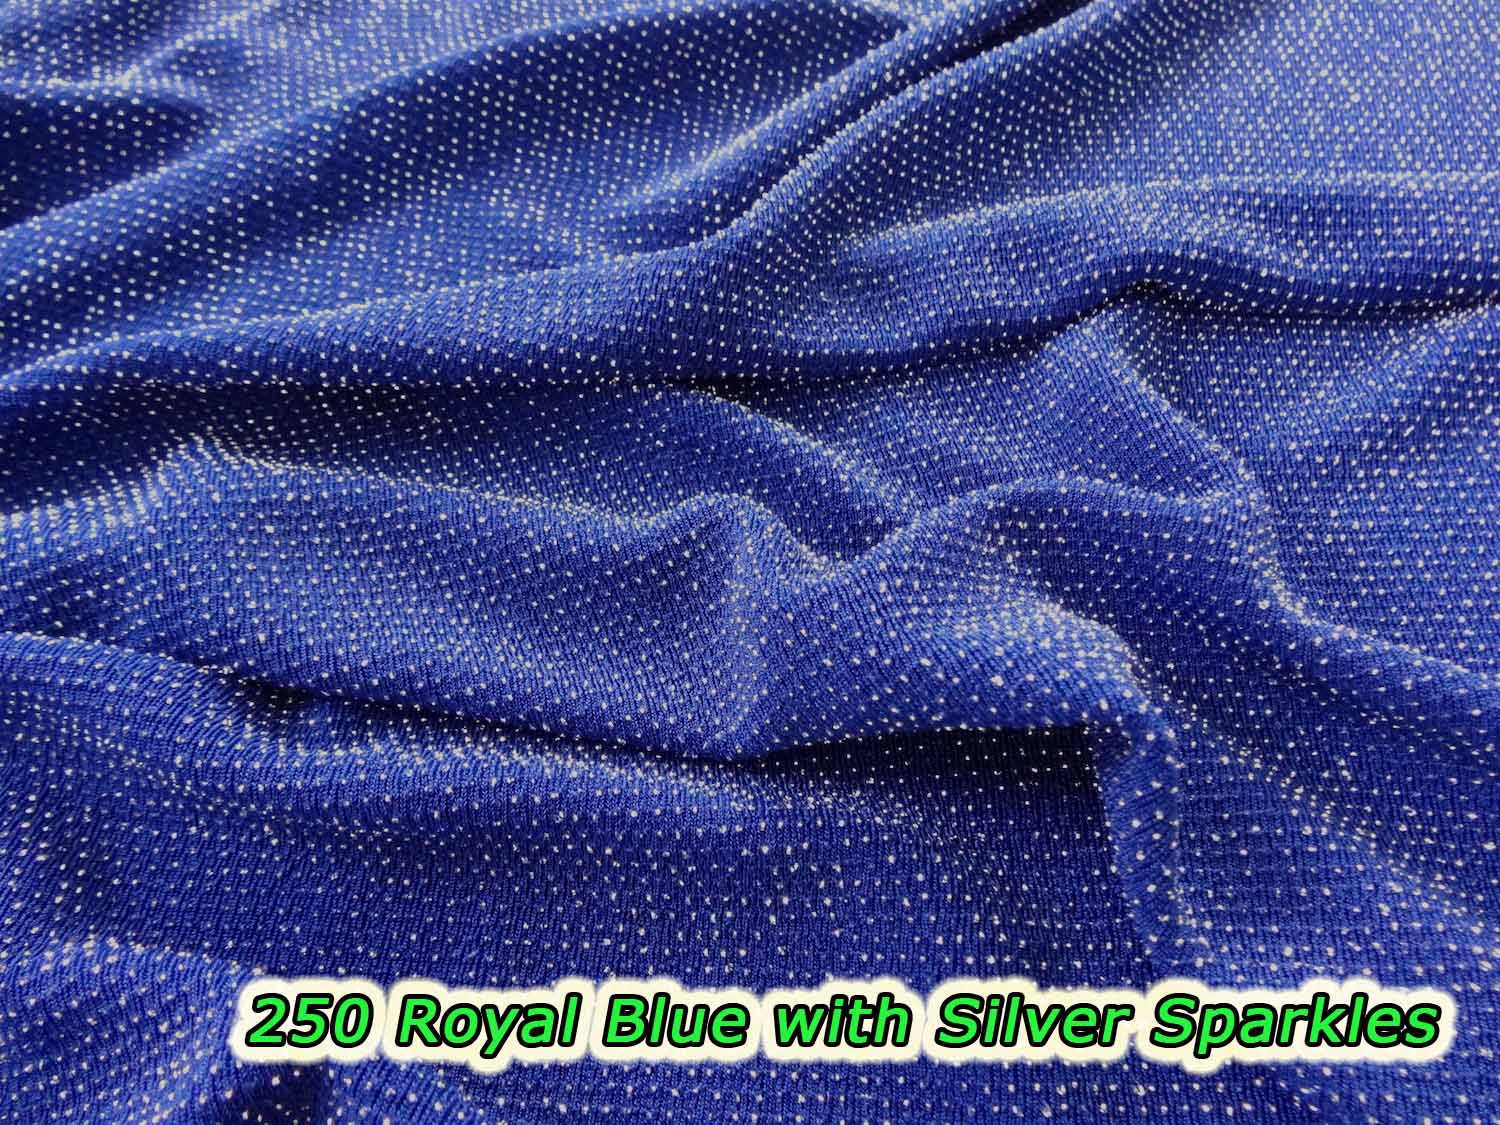 250 Royal Blue with Silver Sparkles